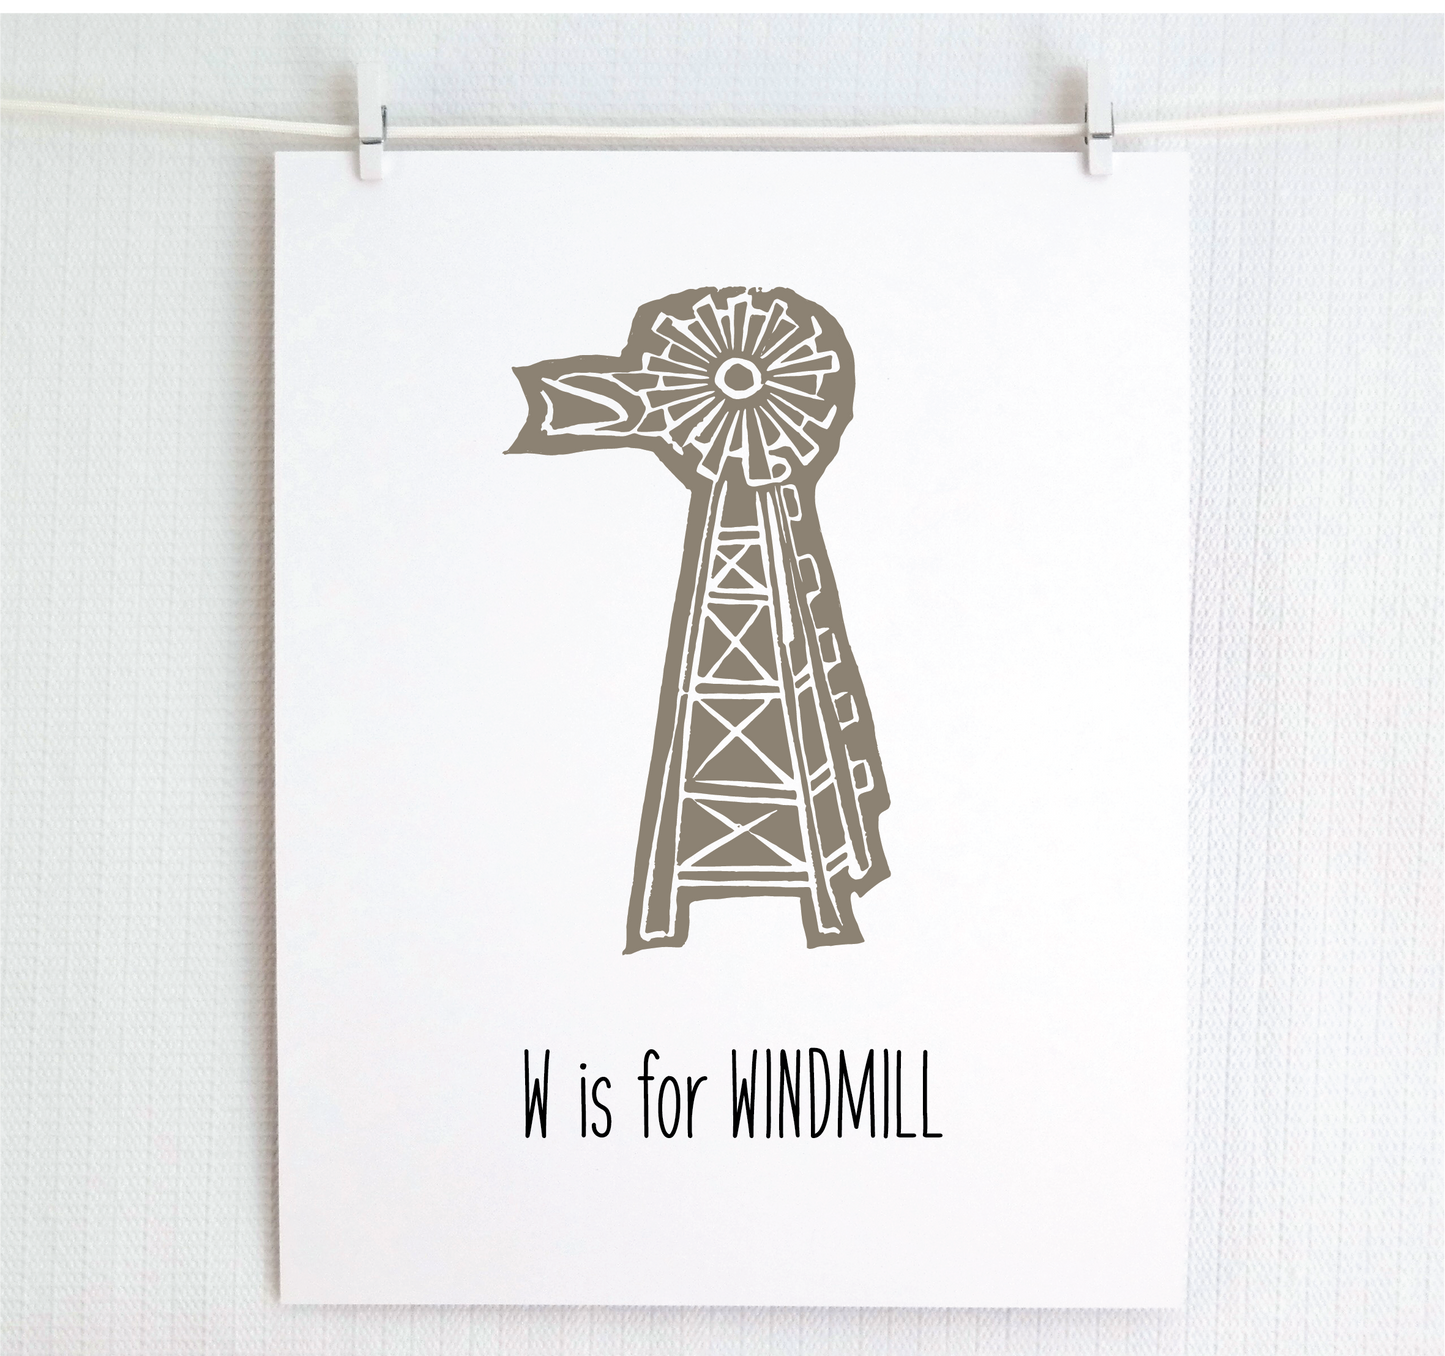 W is for Windmill